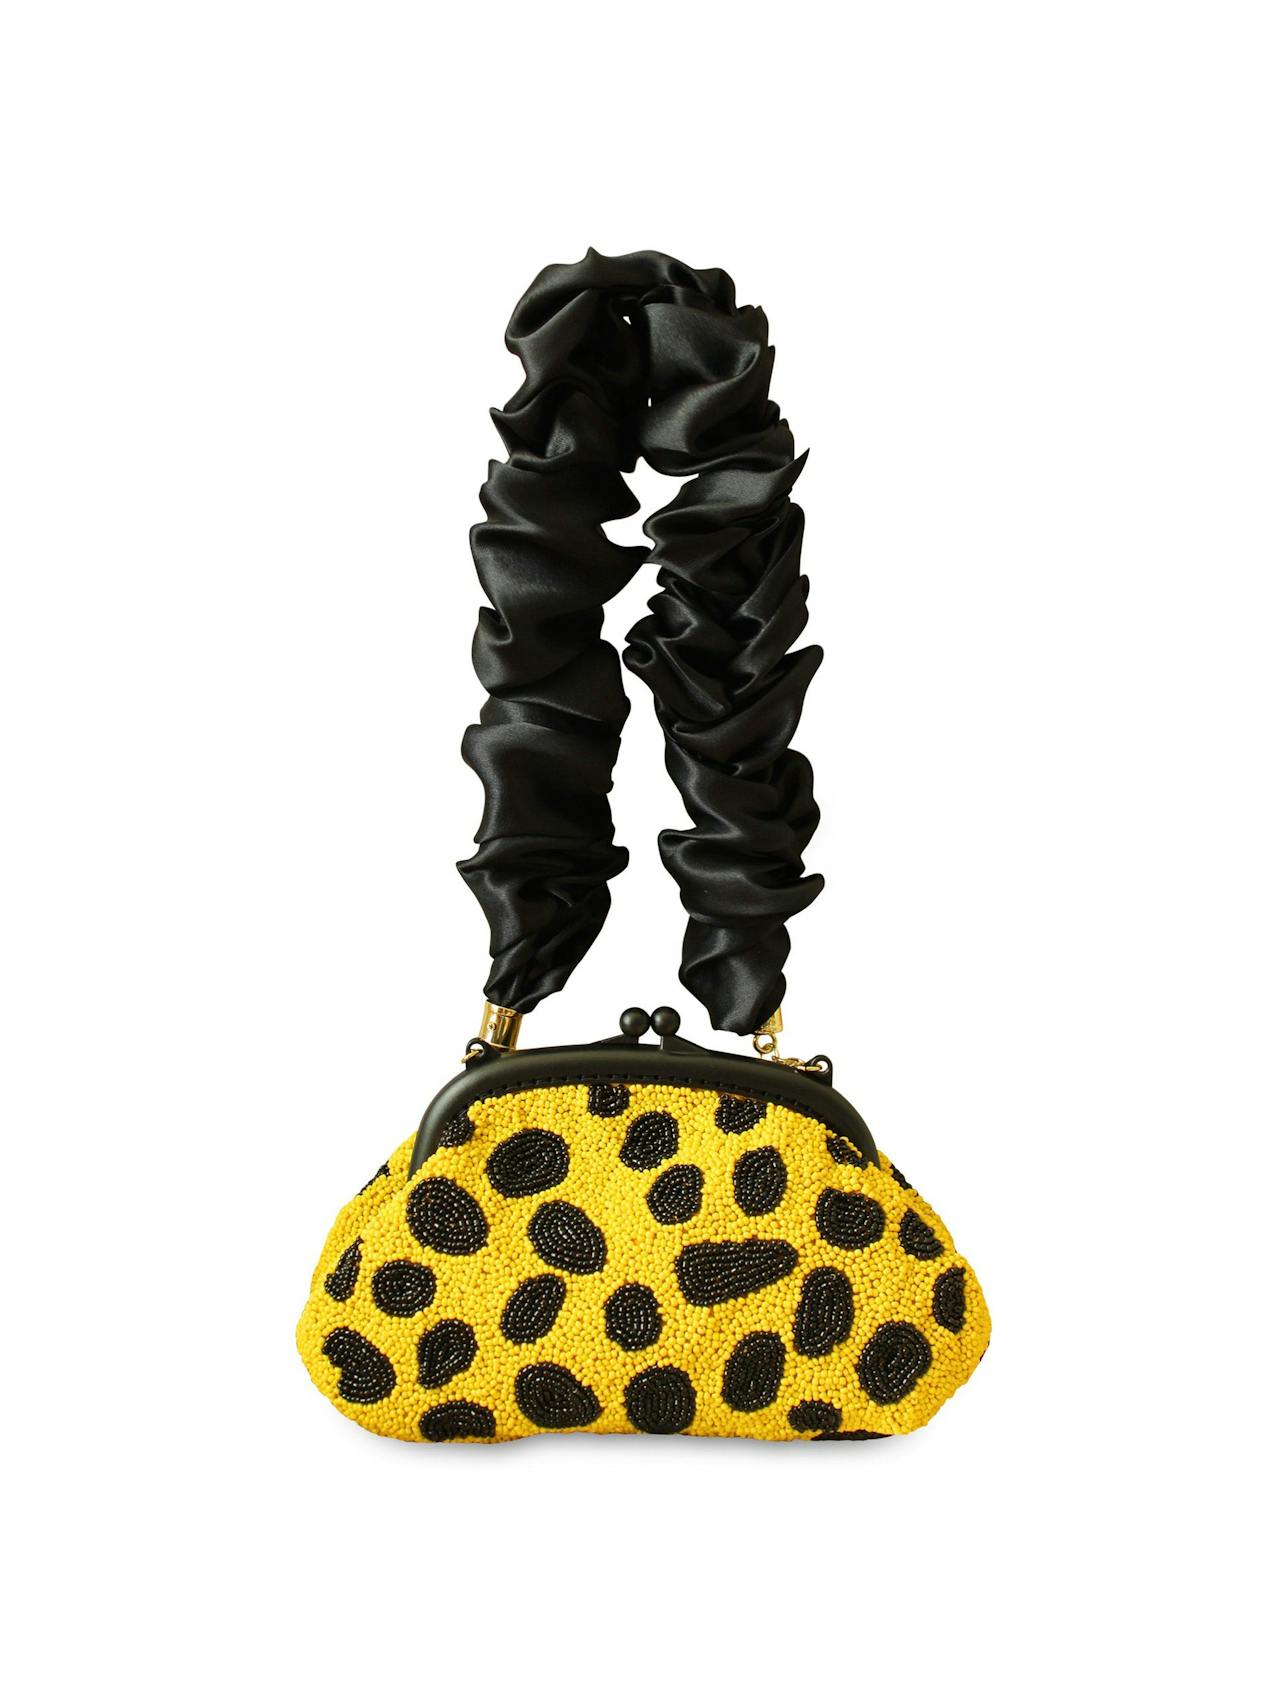 Arnoldi venom hand-beaded clutch bag in black and yellow